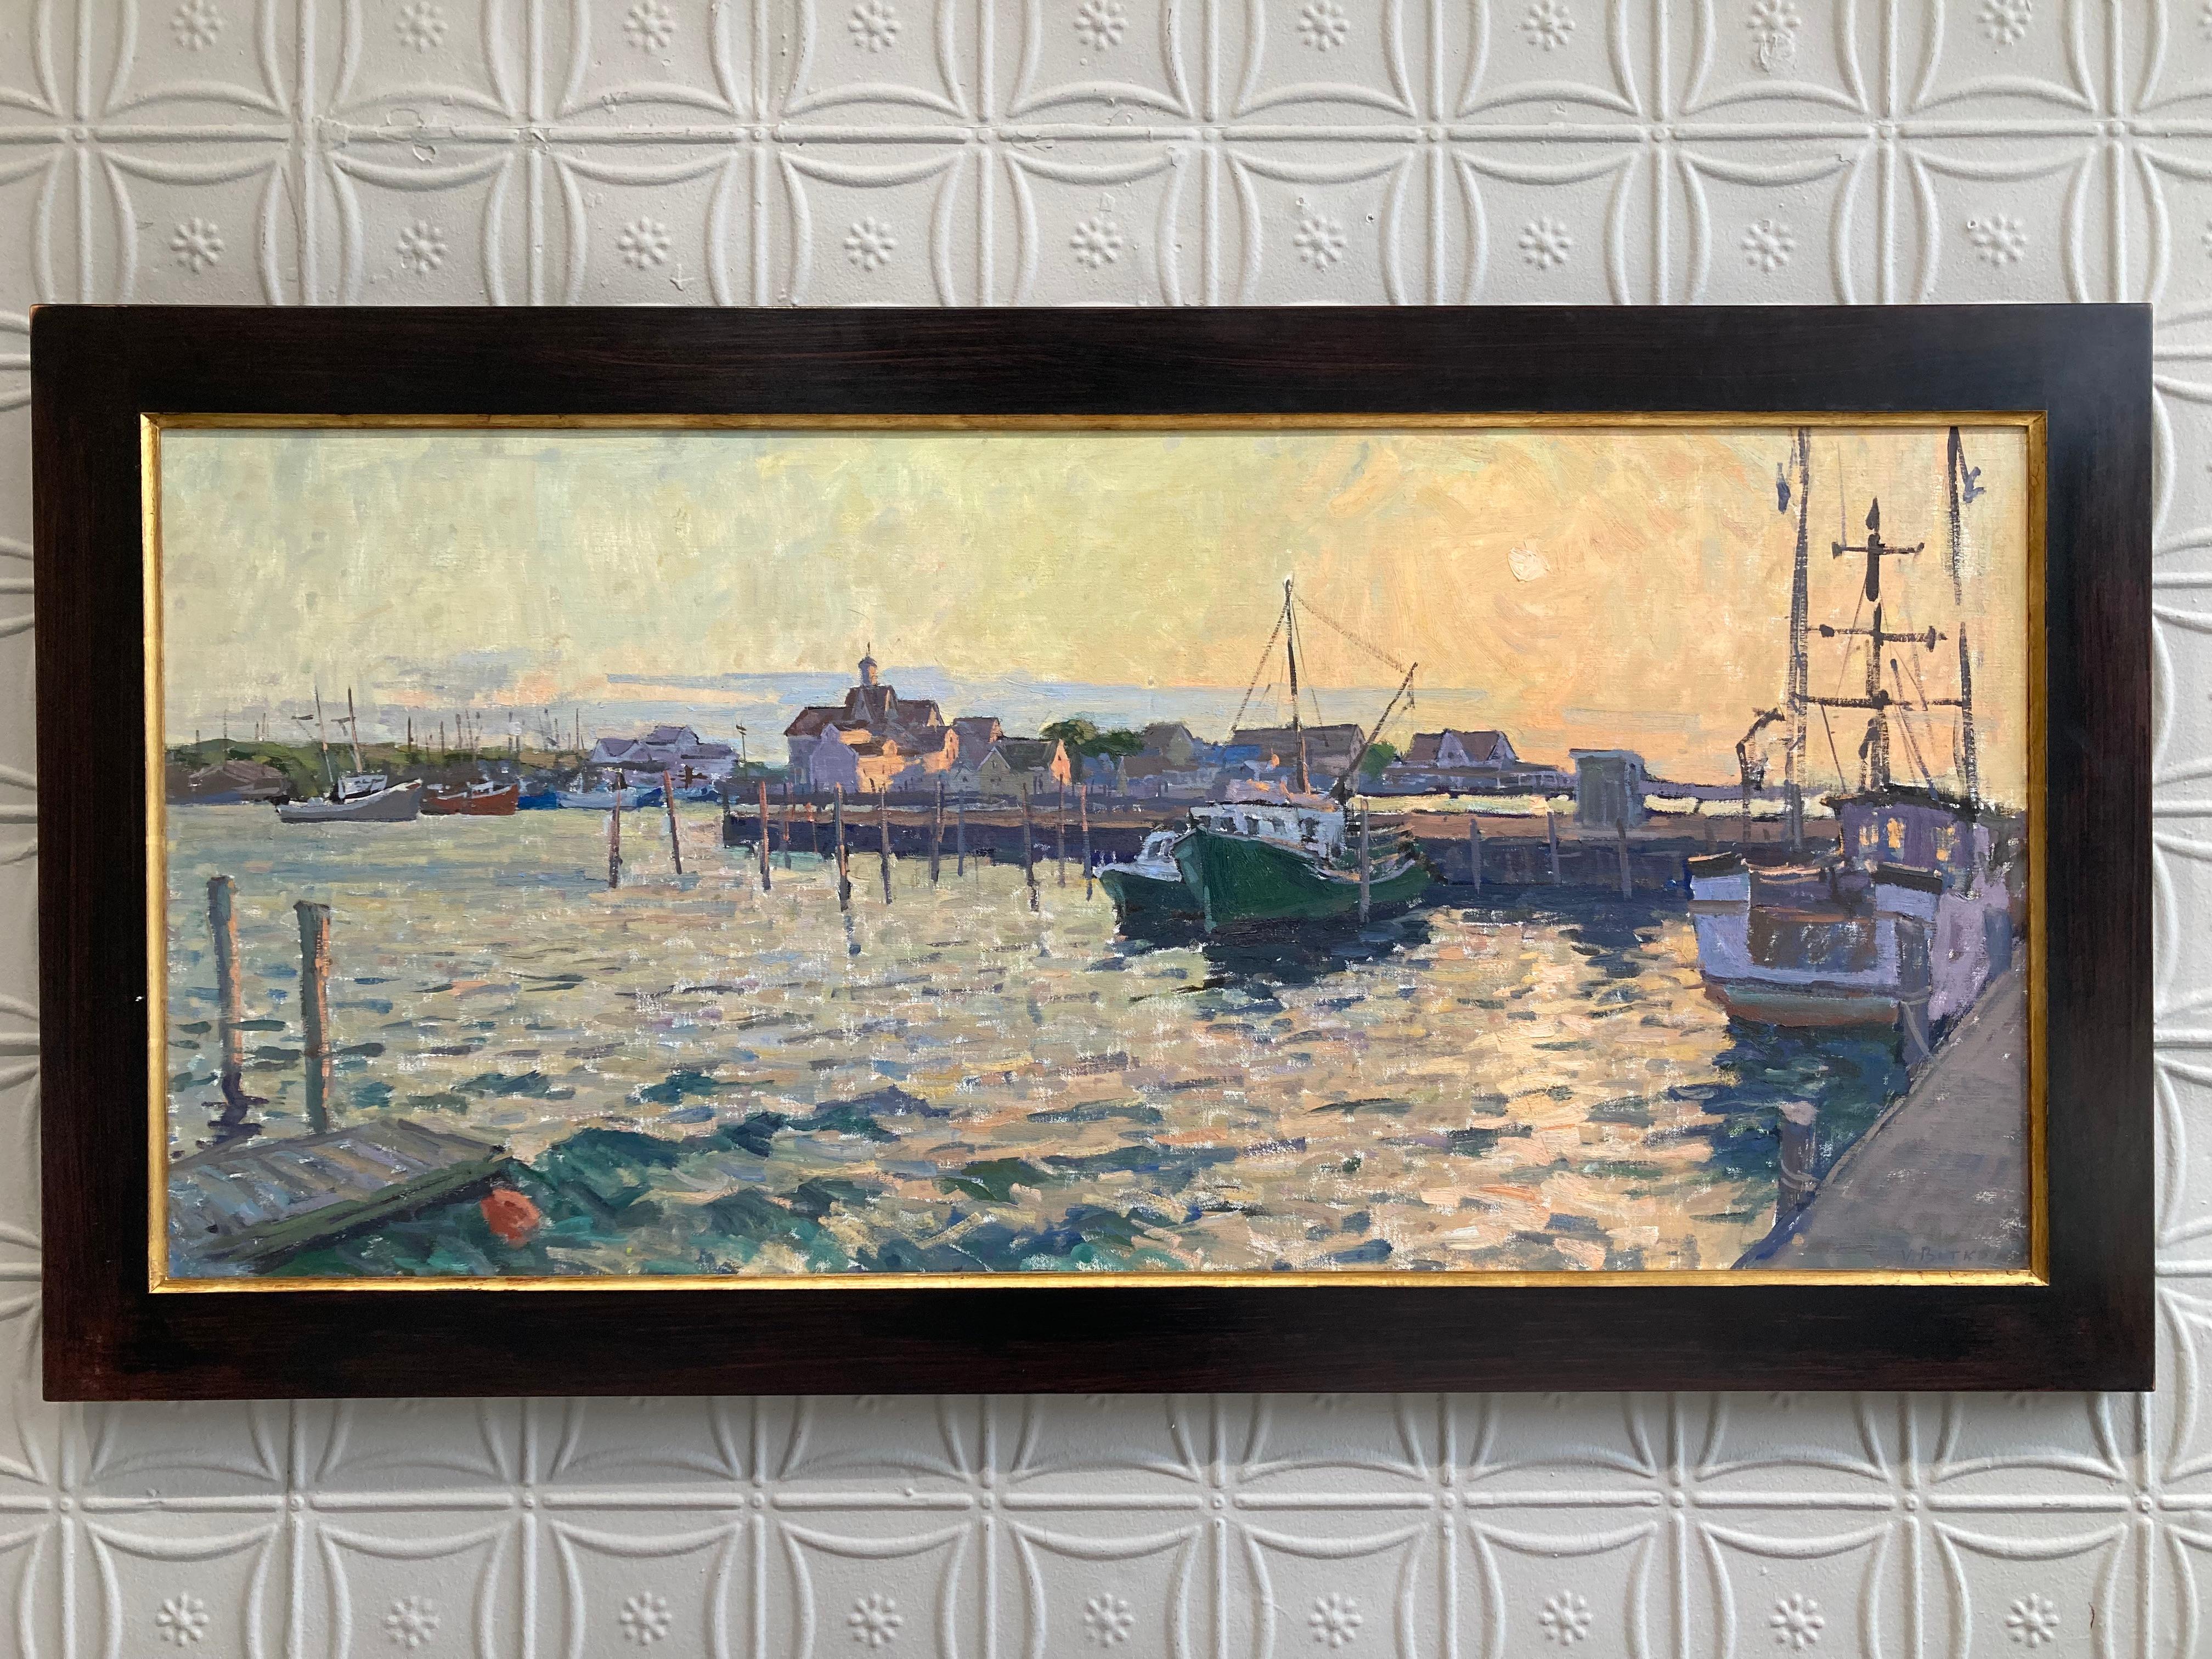 Butko paints the natural, sprawling light of early, mid, and late day. In this composition–his largest of 2023—Butko takes on early summer's mid-day light in Northeastern U.S. The clouds show signs of rainy spring that the June sun is trying to